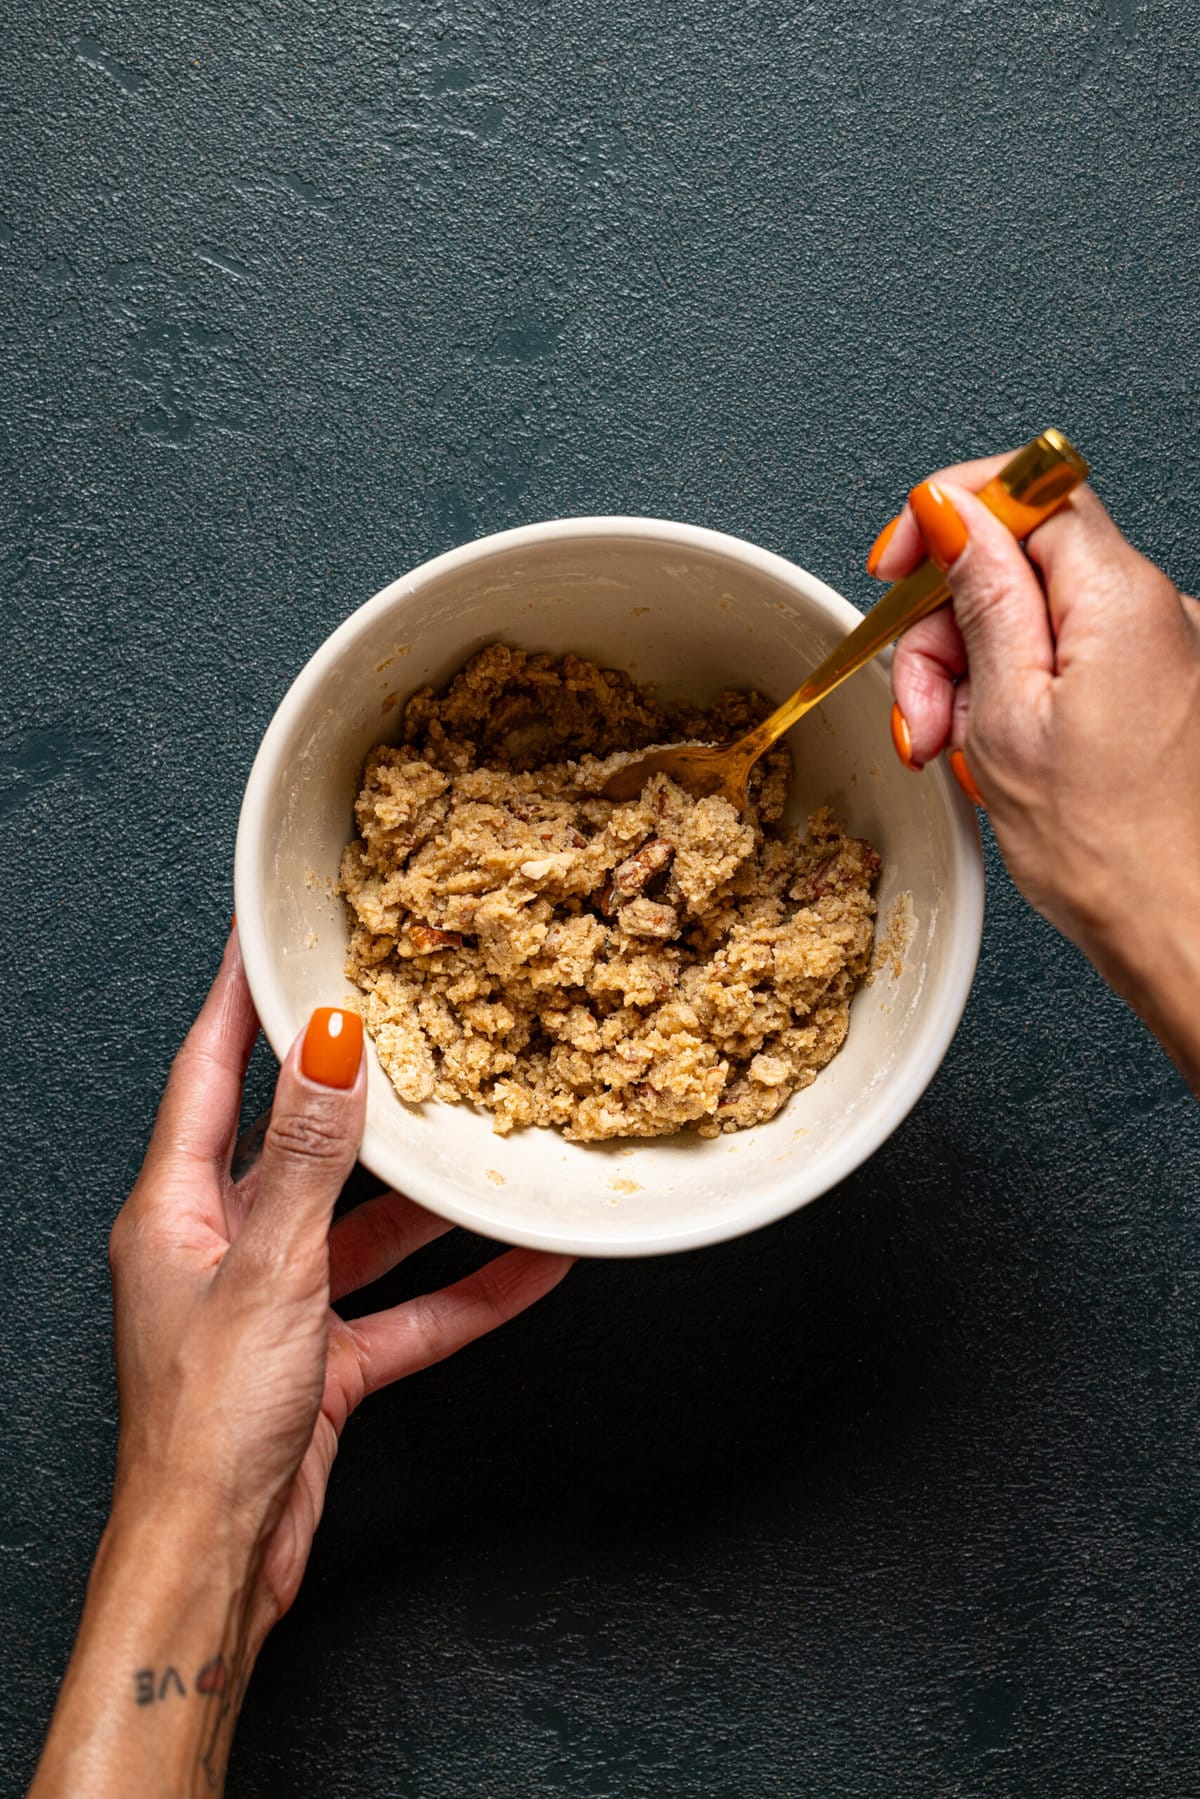 Crumble topping being mixed together in a bowl with a spoon.